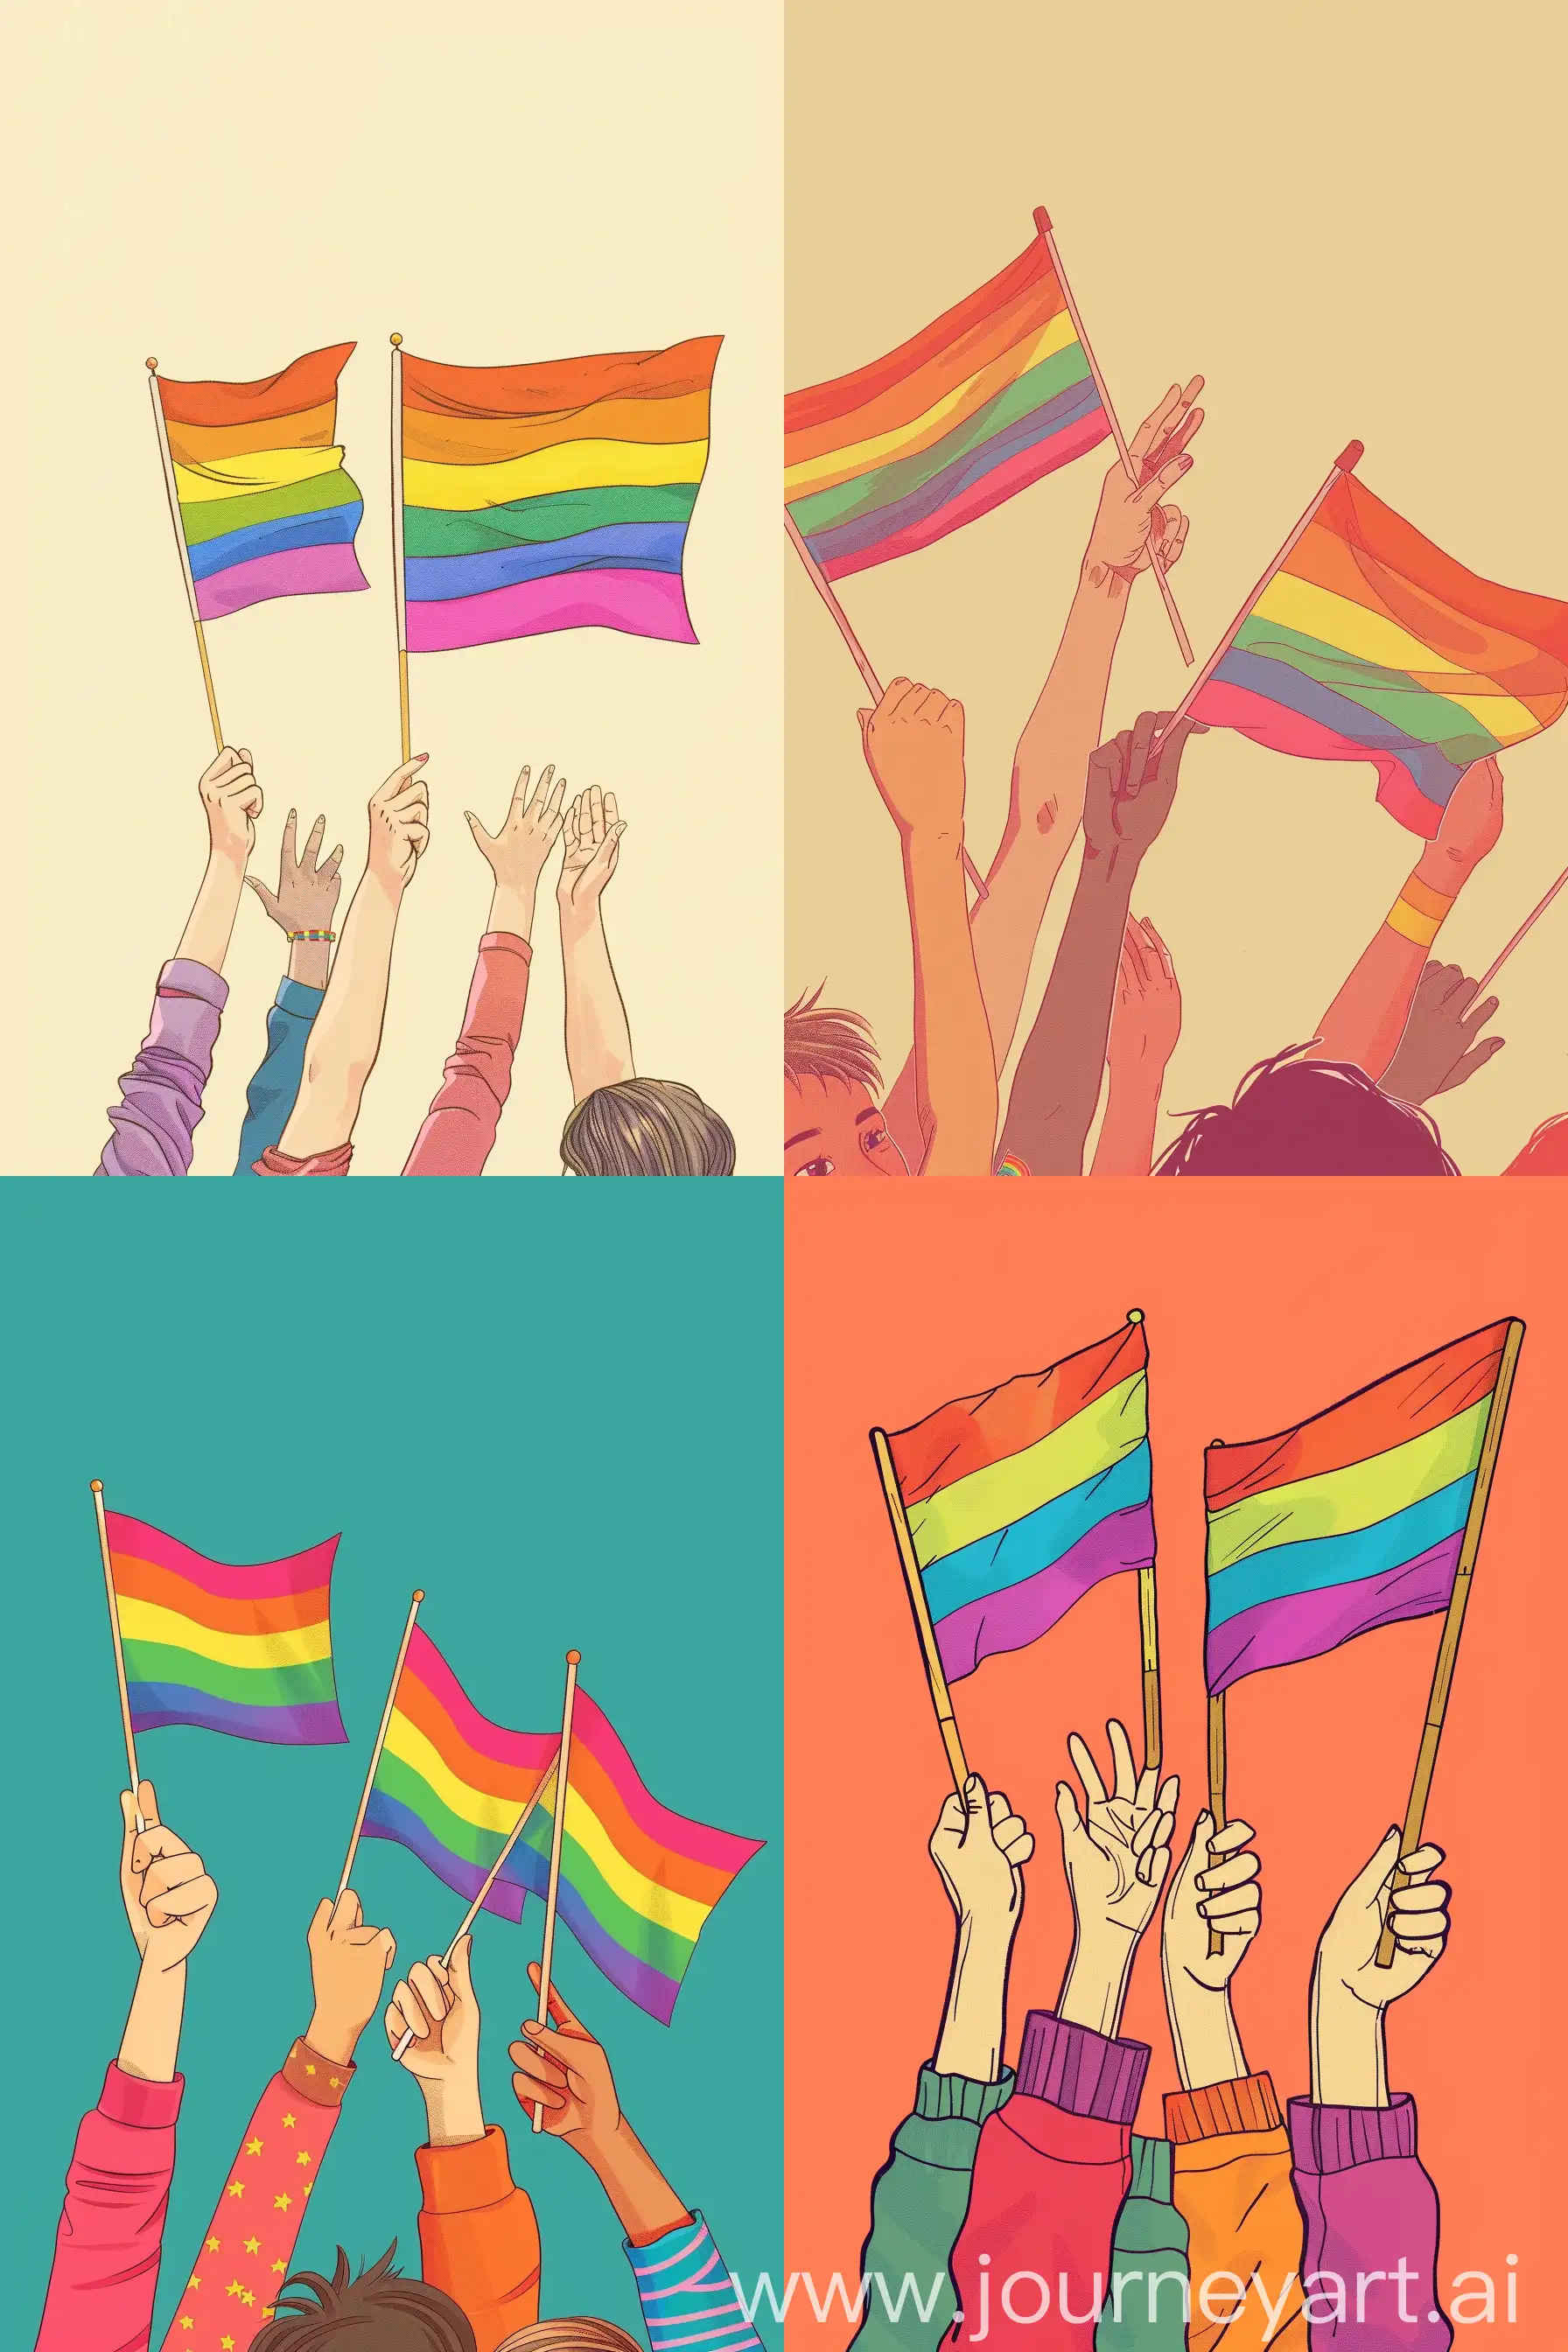 color photo of: a group of children's hands waving rainbow flags, in a minimalist and graphic illustration style. The hands are varied in size and skin tone, creating a diverse representation. The rainbow flags are vibrant and dynamic, with bold, clean lines. The composition is simple yet impactful, focusing on the unity and joy of the children's gestures. The background is a solid color, providing a clean and uncluttered canvas for the illustration. The overall aesthetic is contemporary and visually striking, capturing the essence of the "Queer Families in China" media account. —c 10 —ar 2:3